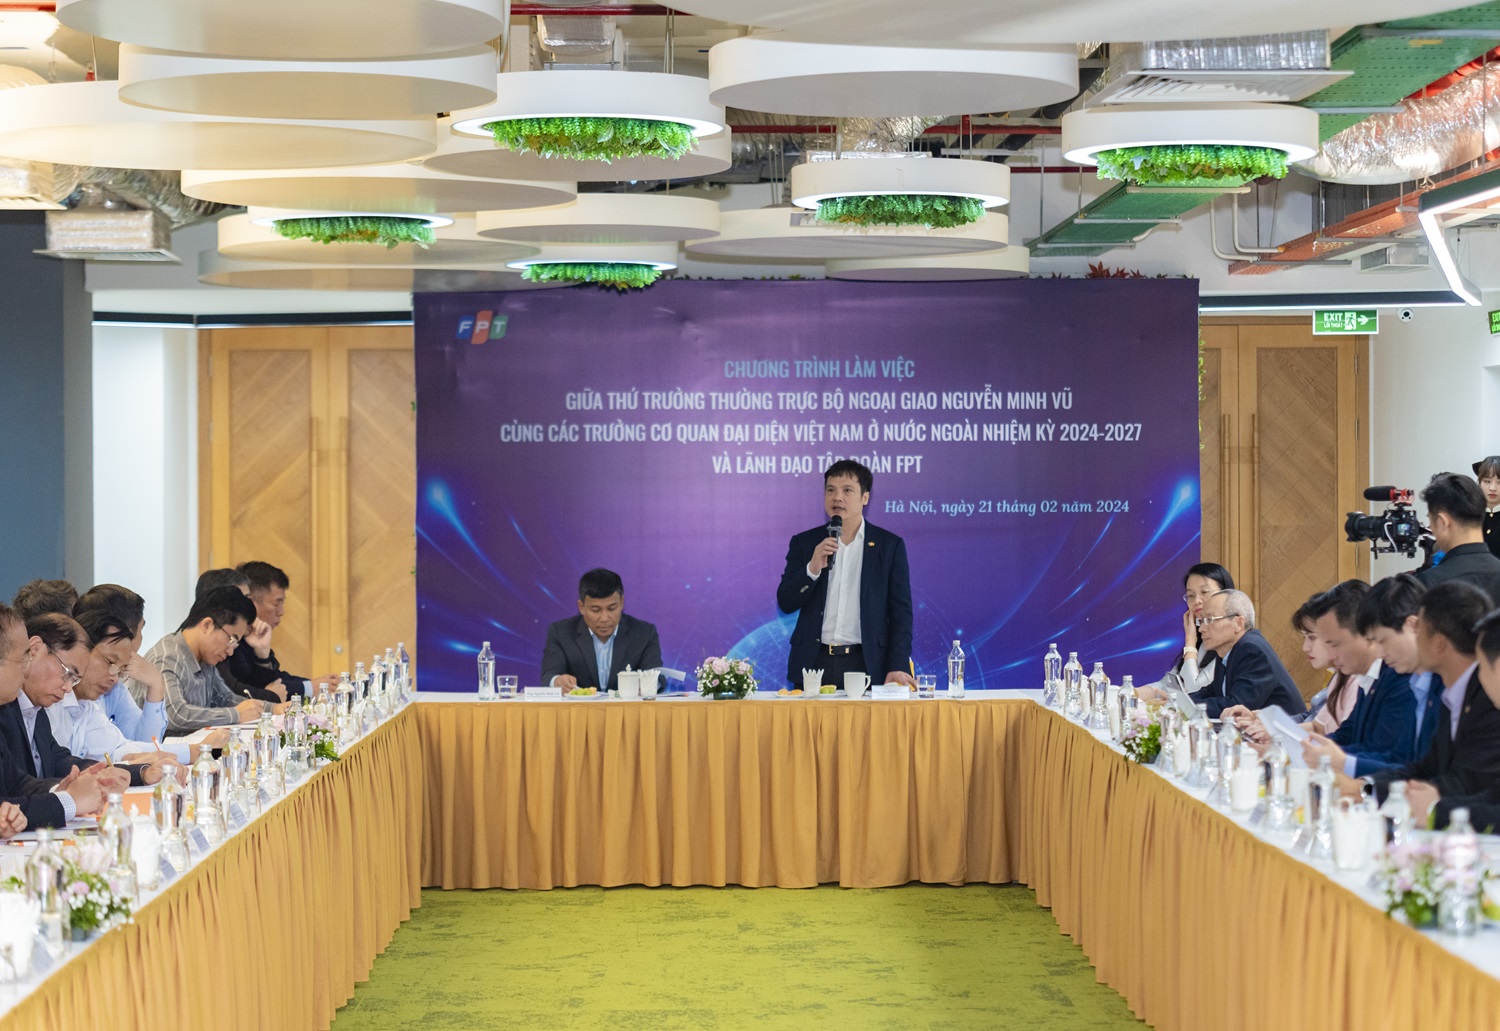 Mr. Nguyen Van Khoa, CEO of FPT, delivered a speech during the meeting with Deputy Minister of Foreign Affairs Nguyen Minh Vu and Heads of Vietnamese Representative Agencies Abroad.